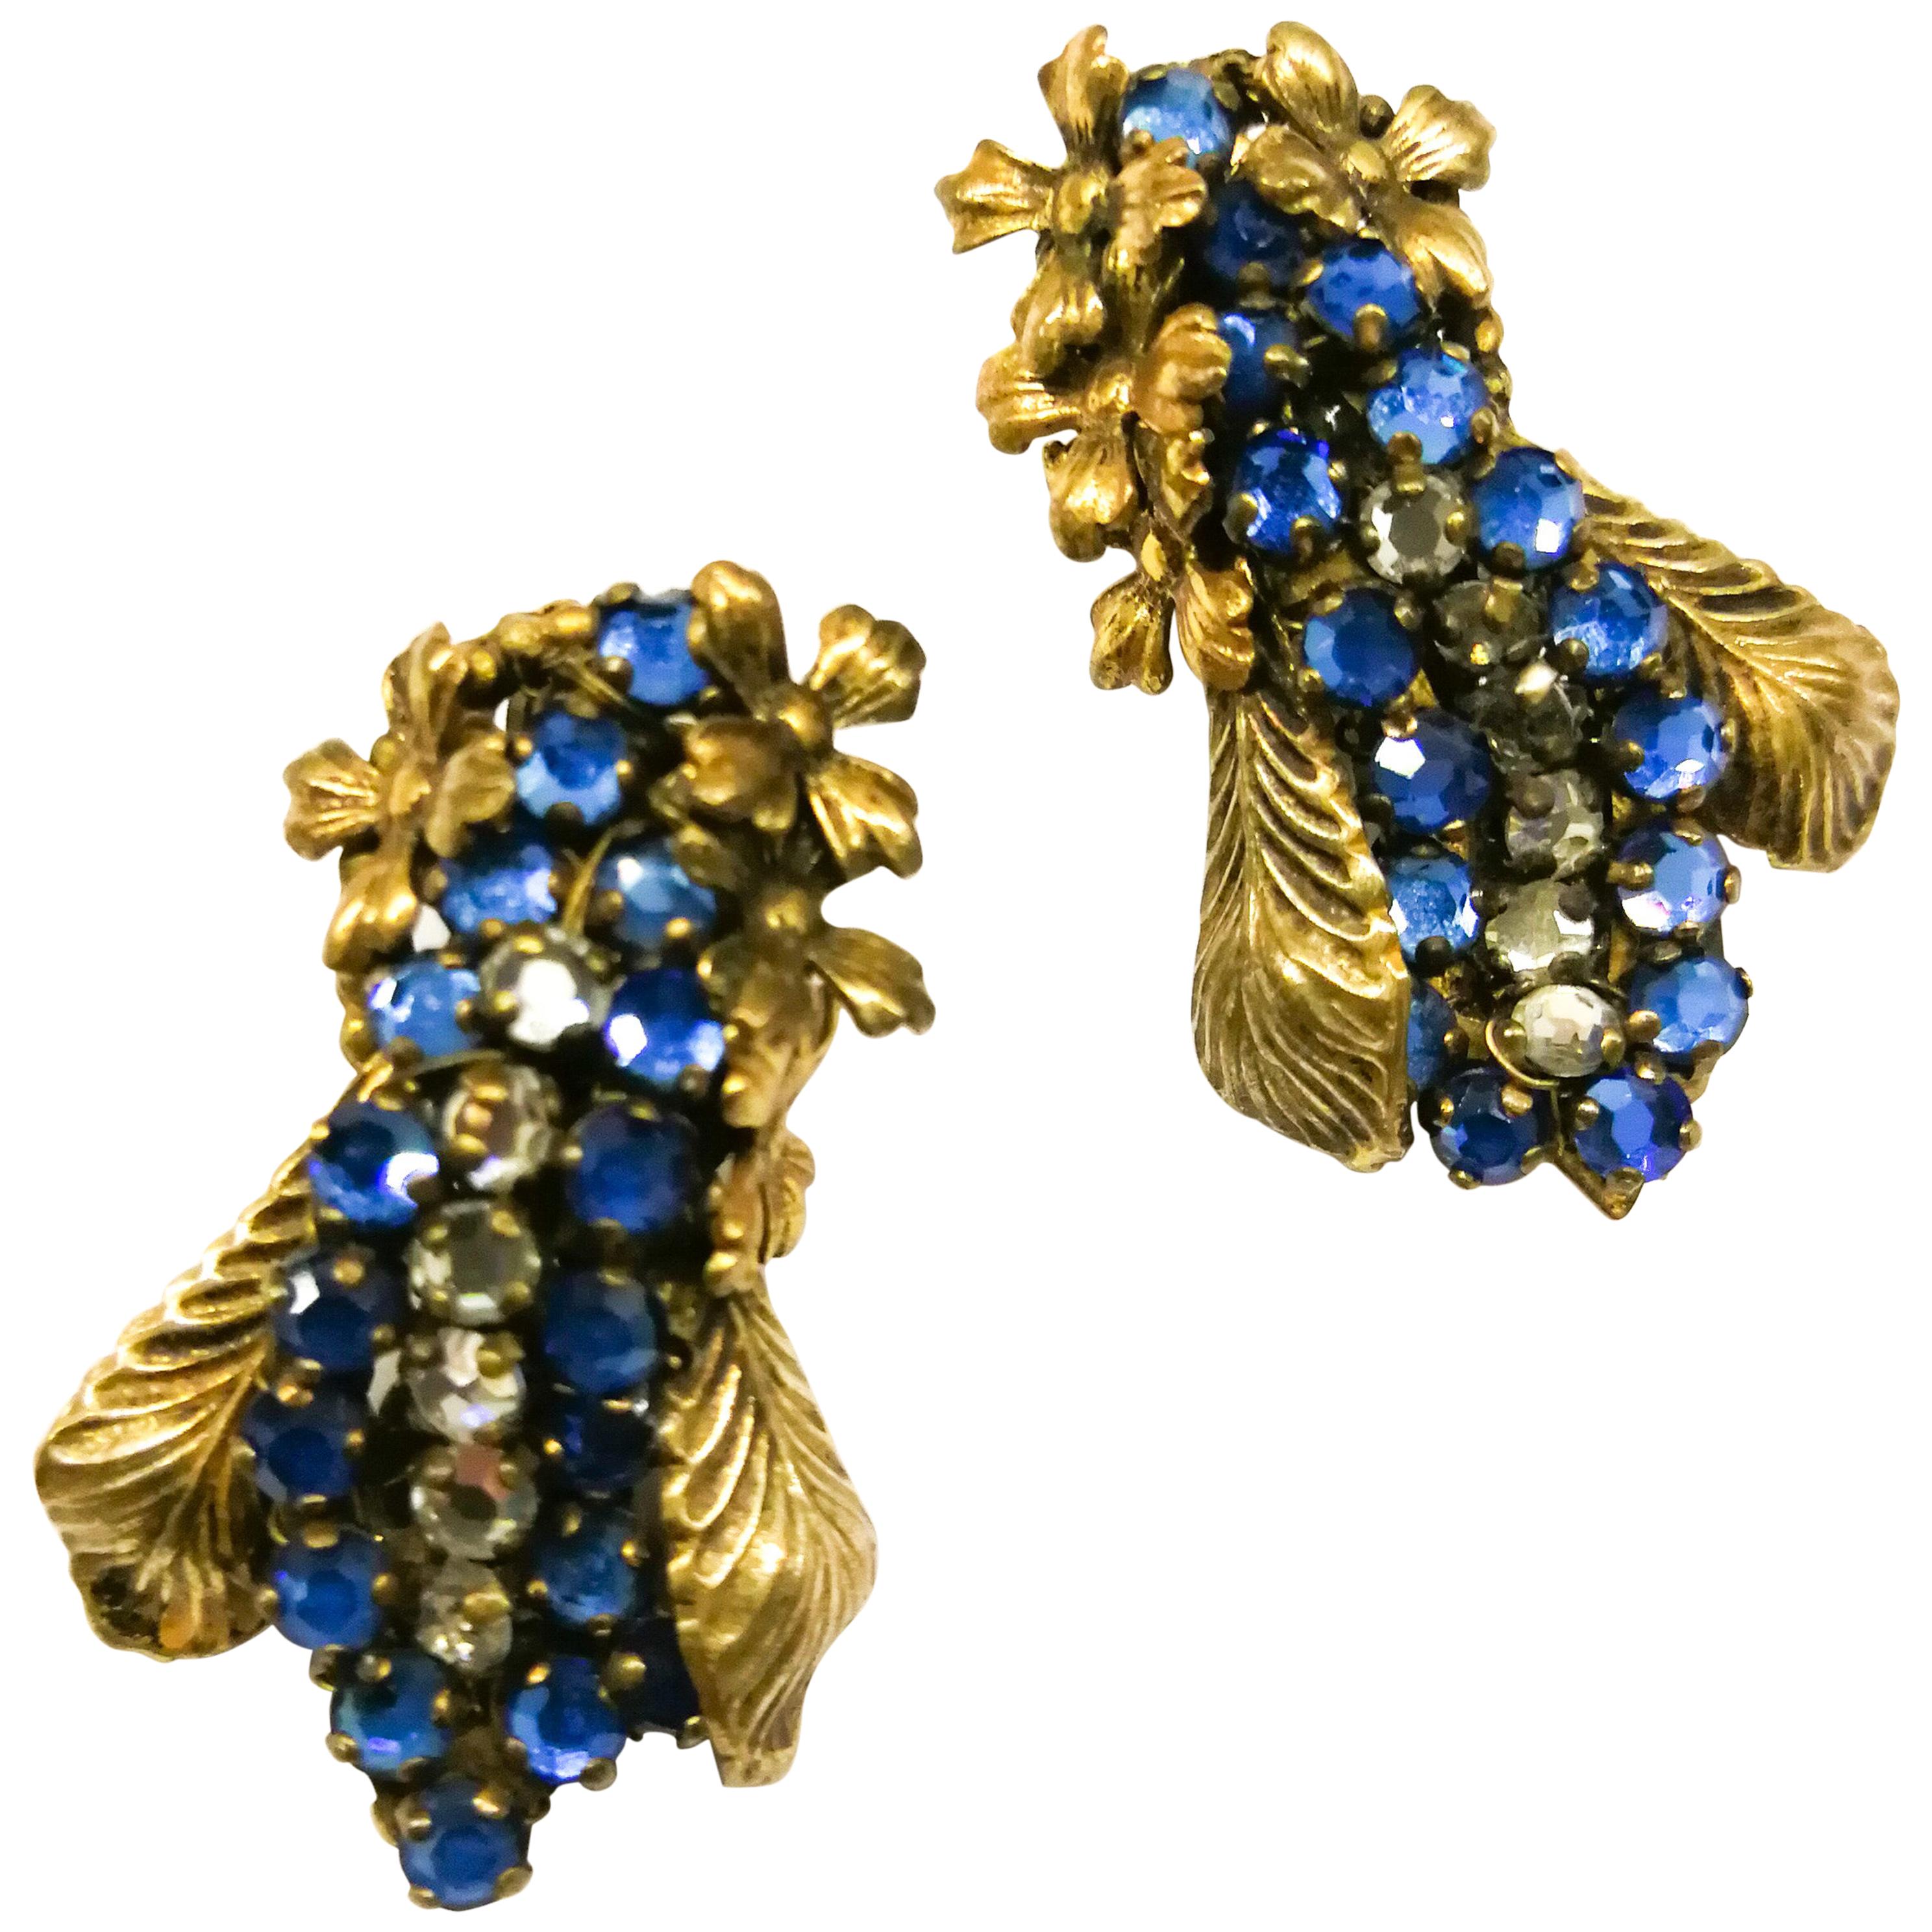 Sapphire glass pastes and gilt metal earrings, Miriam Haskell, 1950s